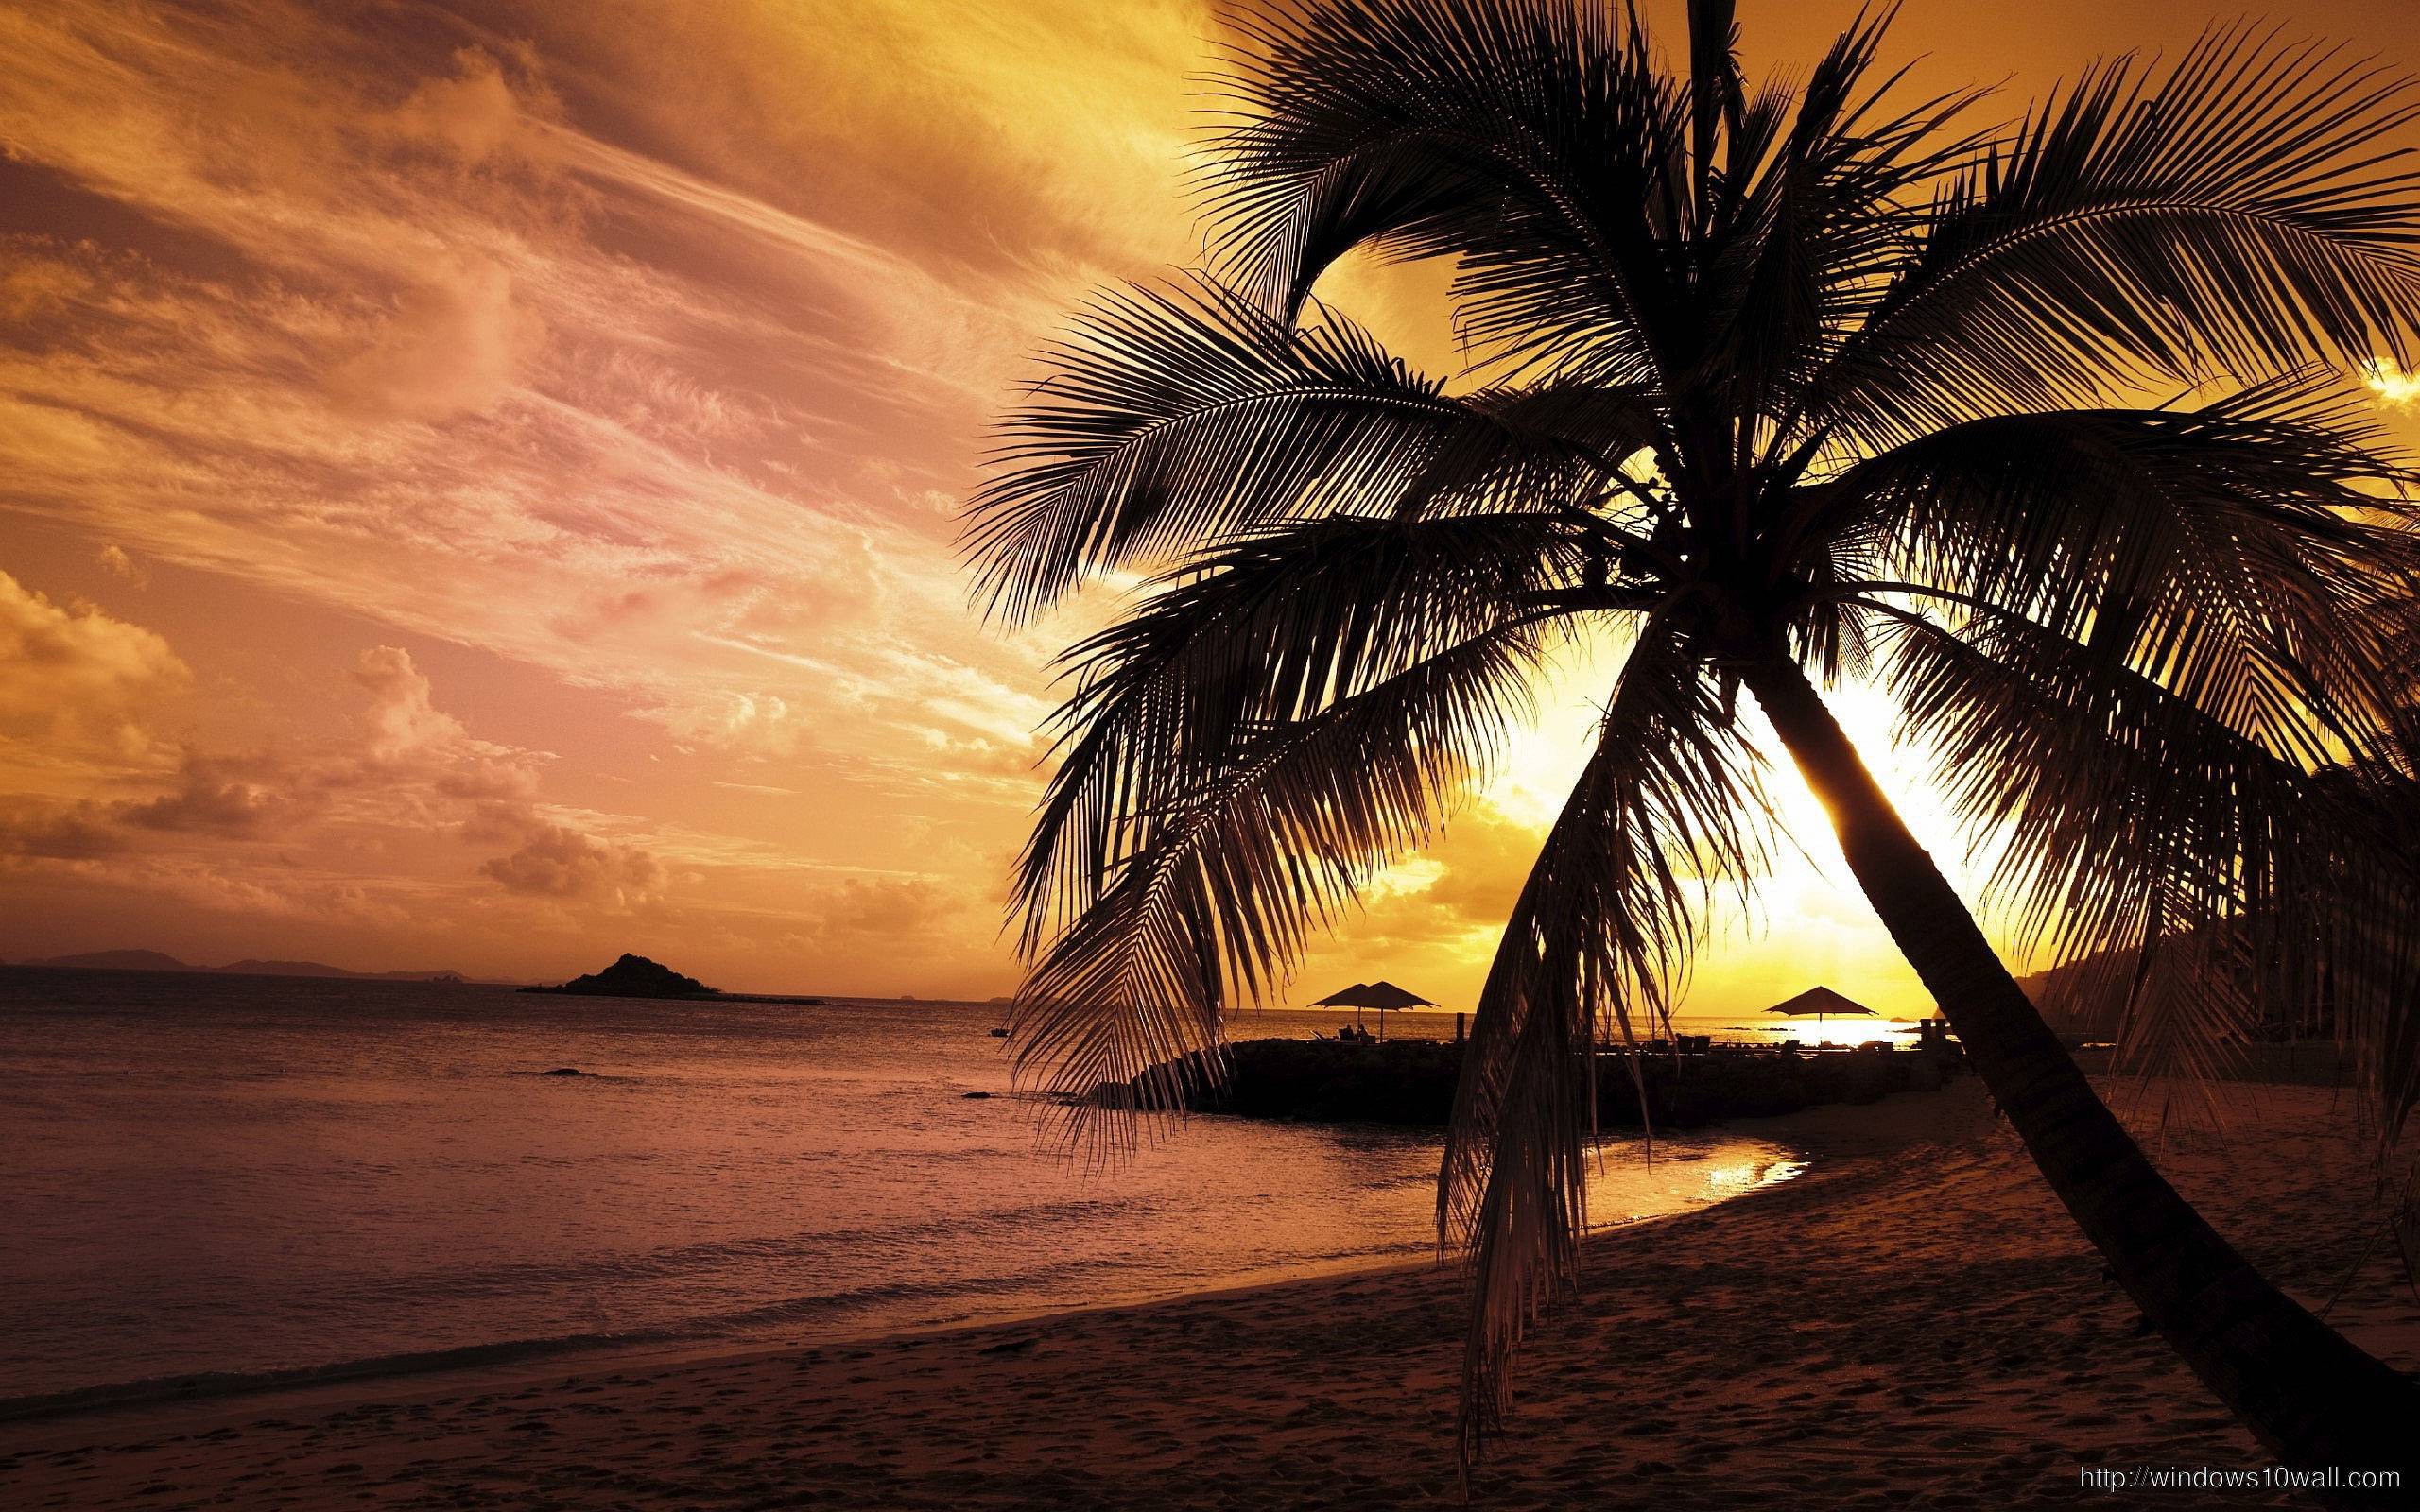 Windows Sunset Wallpapers - Top Free Windows Sunset Backgrounds